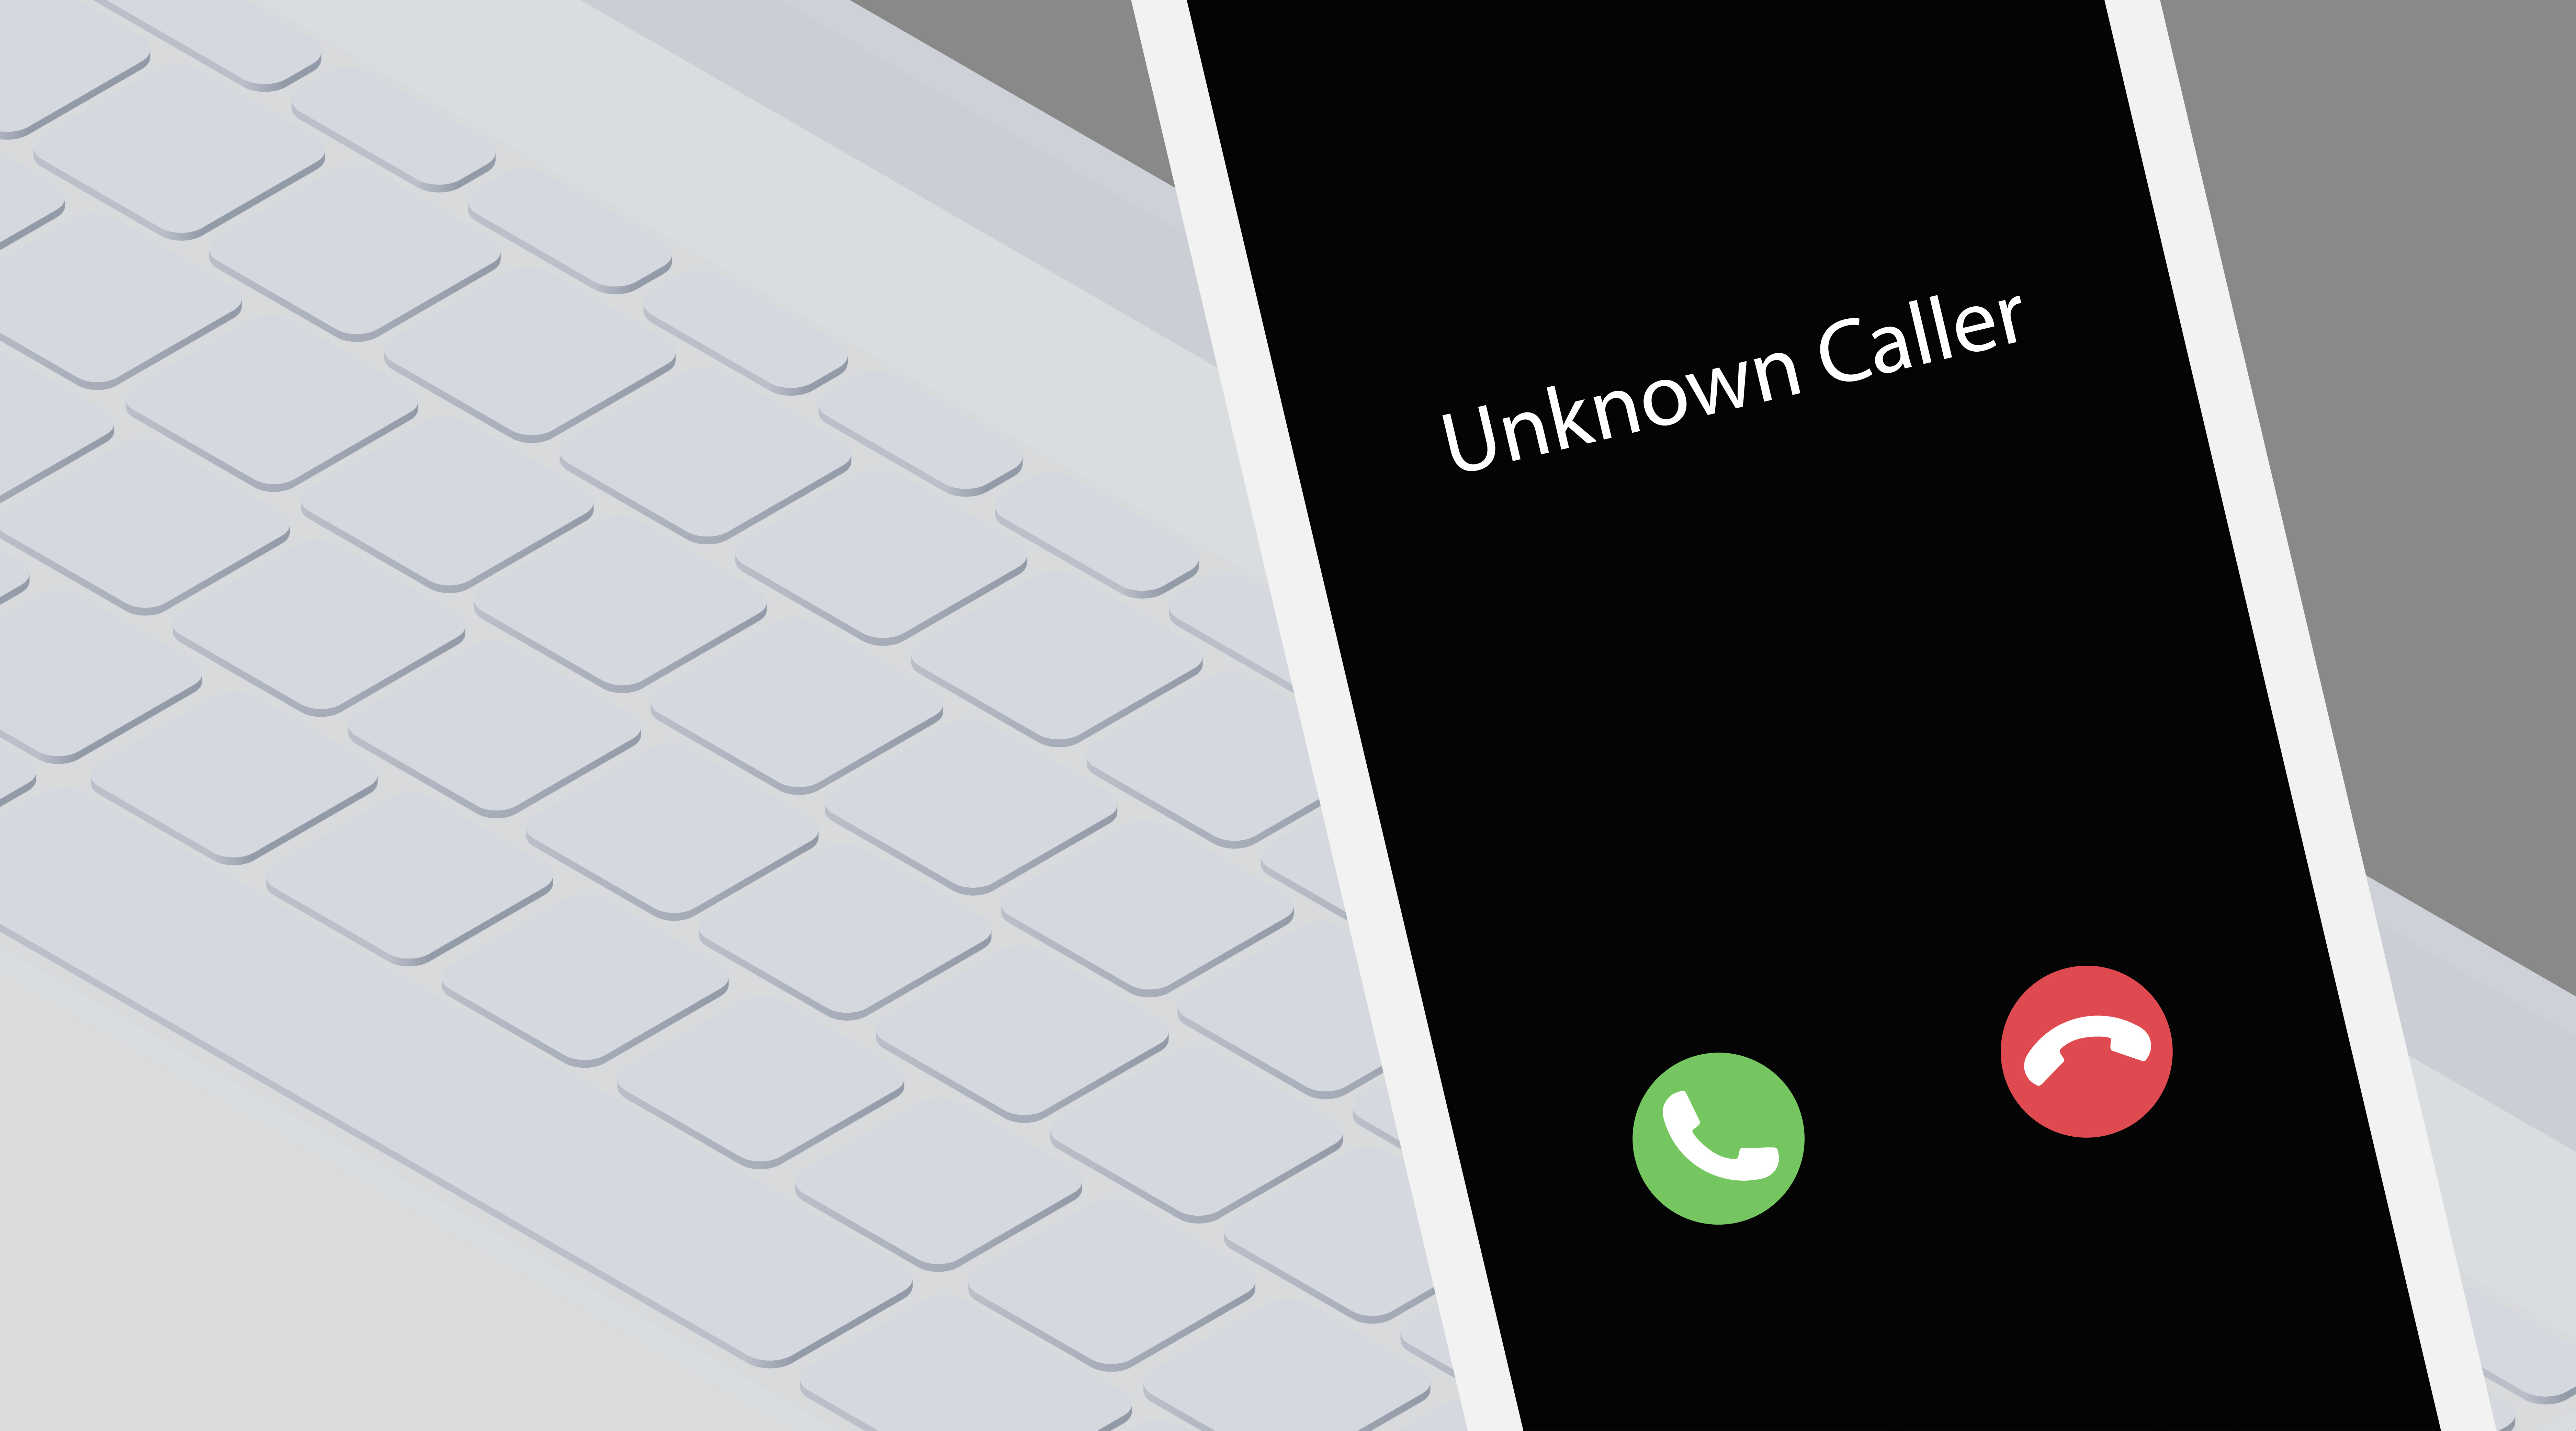 Unknown caller during work. Isometric vector illustration. White smartphone on a laptop keyboard background. Phone interface with two icons accept or reject a call